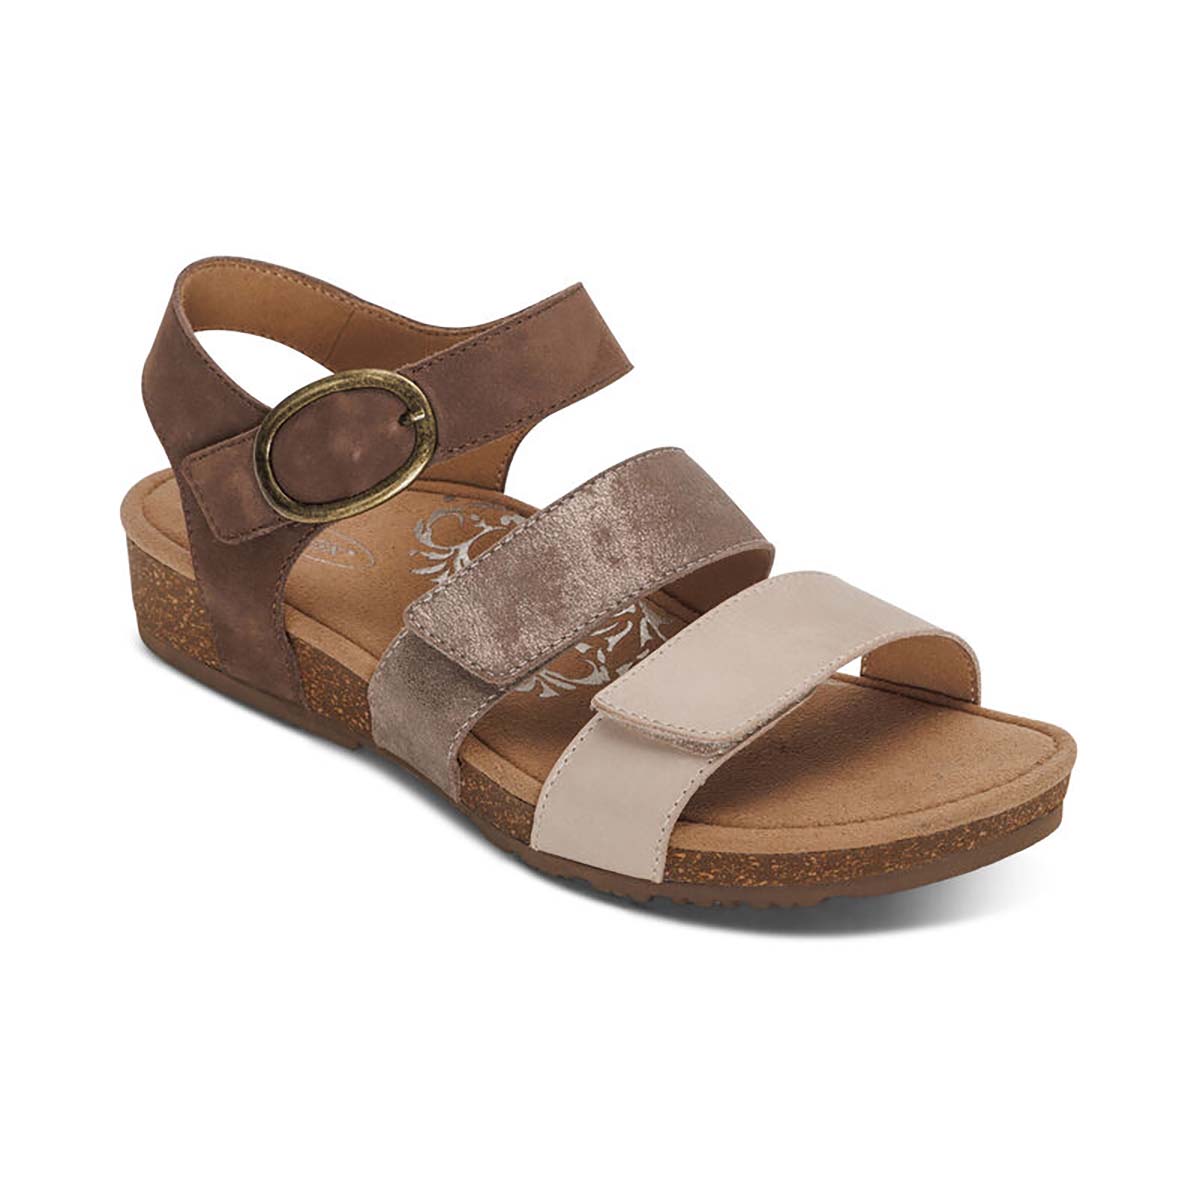 Aetrex Women's Lilly Adjustable Quarter Strap Sandal -Taupe